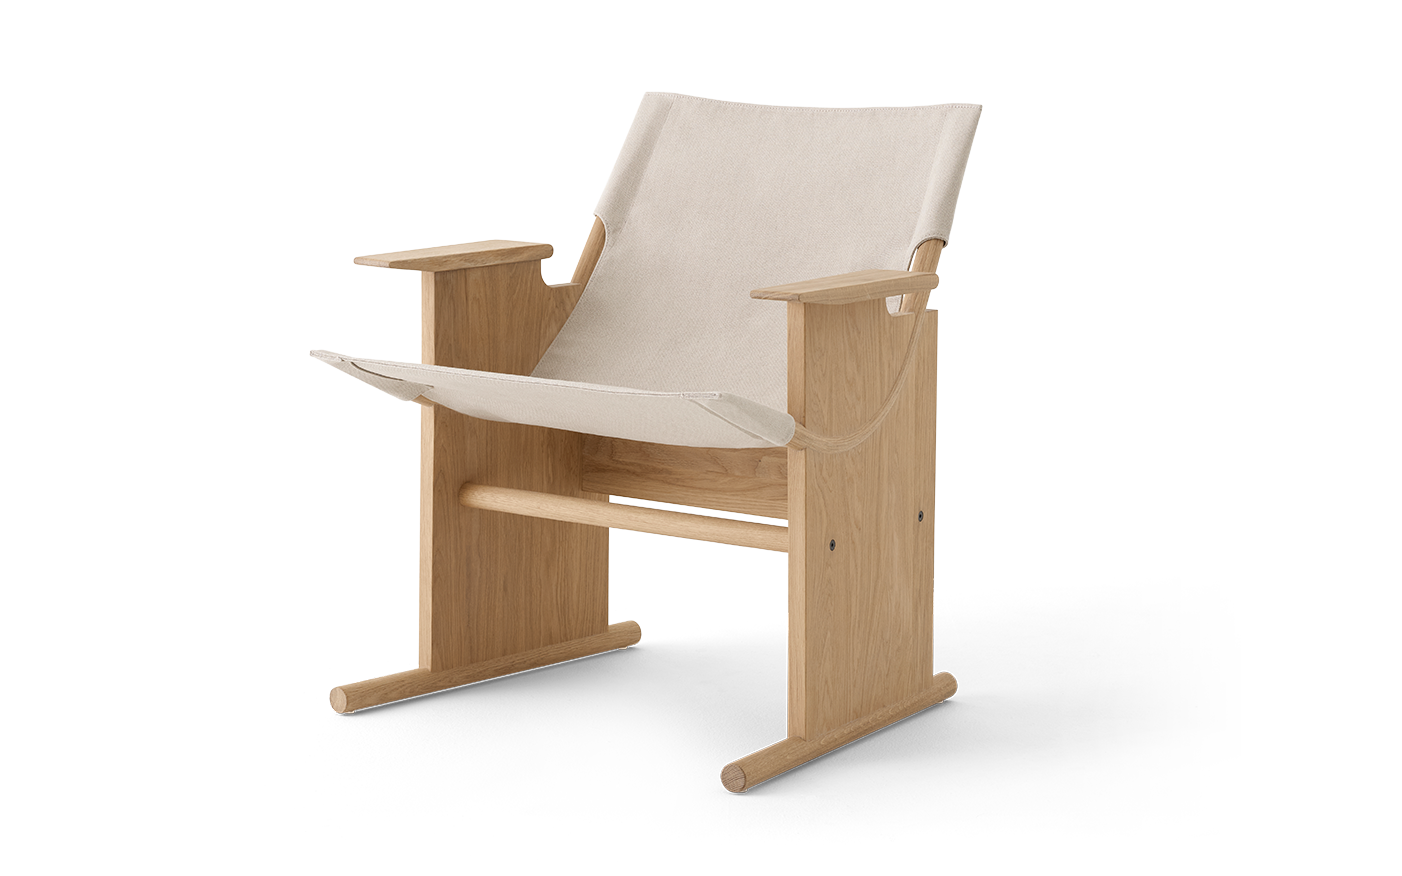 Sling Lounge Chair by Takt